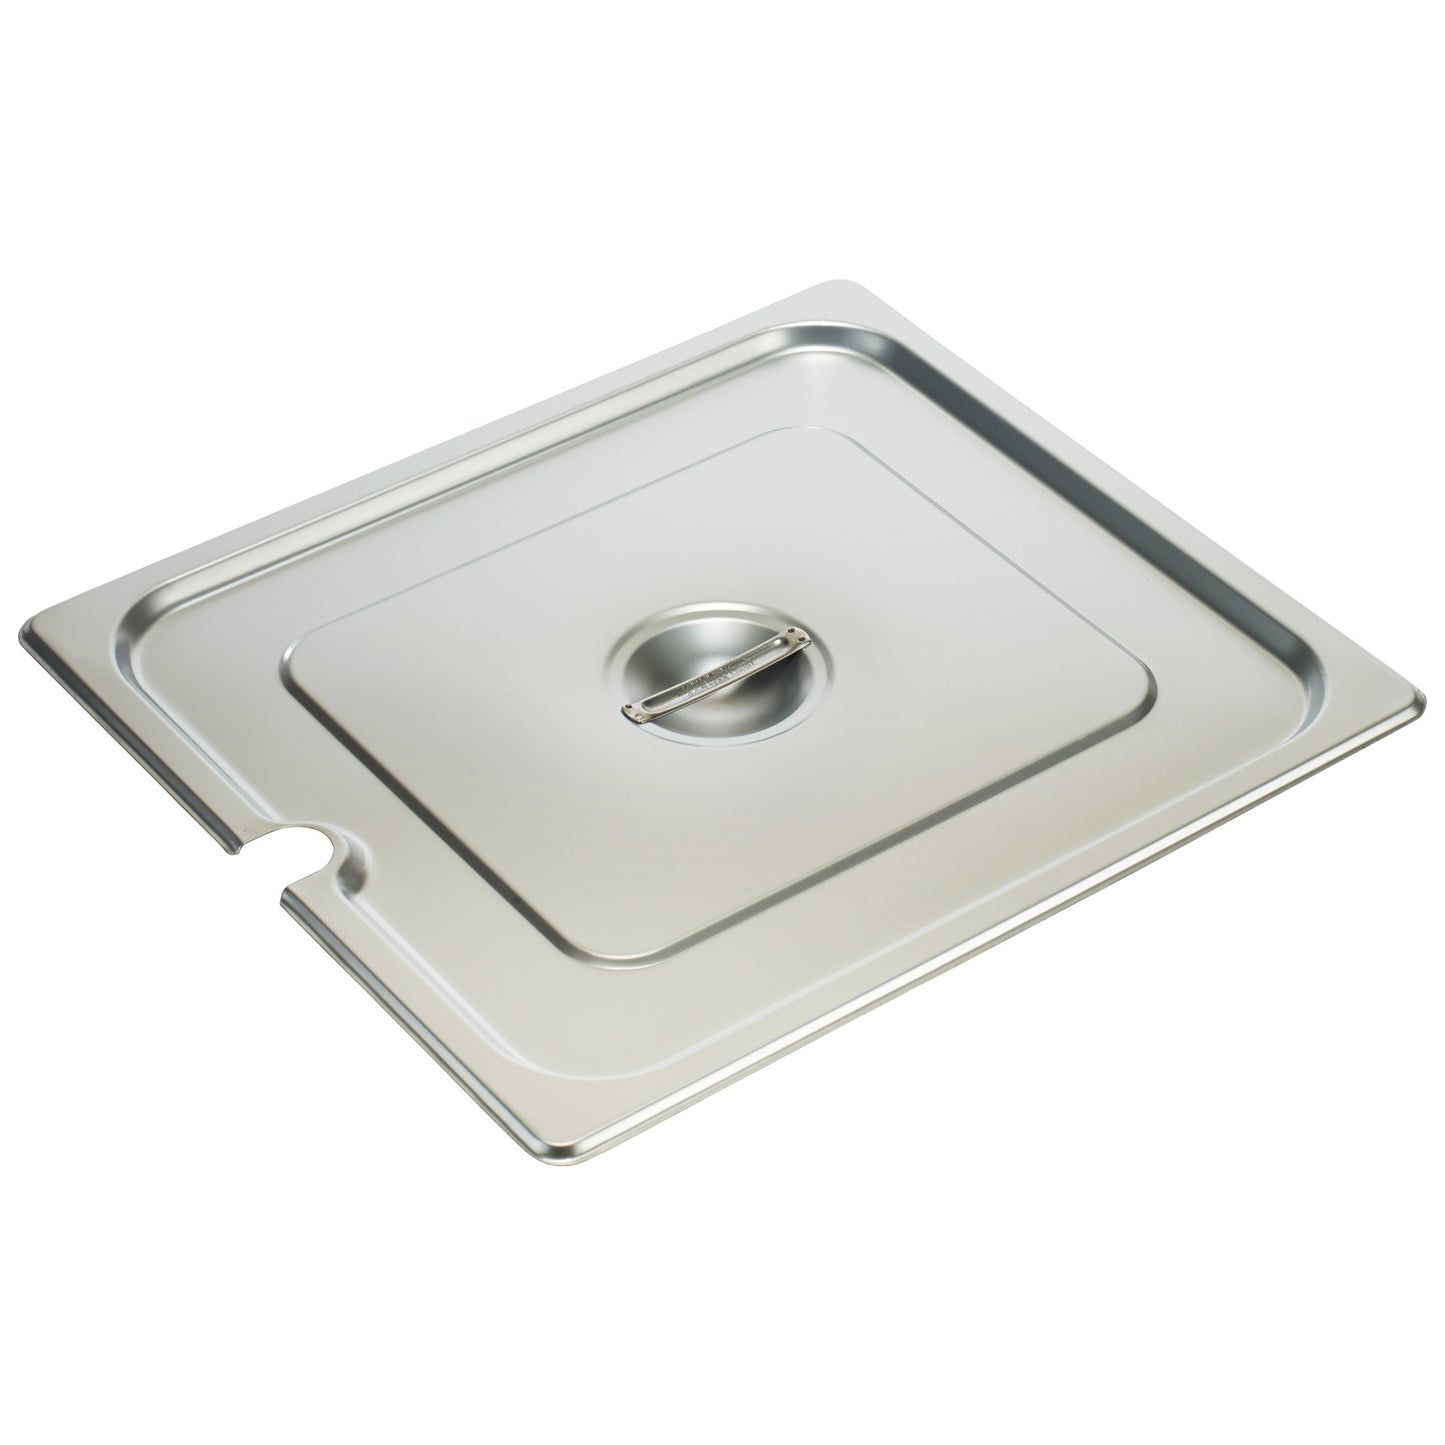 SPCTT - 18/8 Stainless Steel Steam Pan Cover, Slotted - 2/3